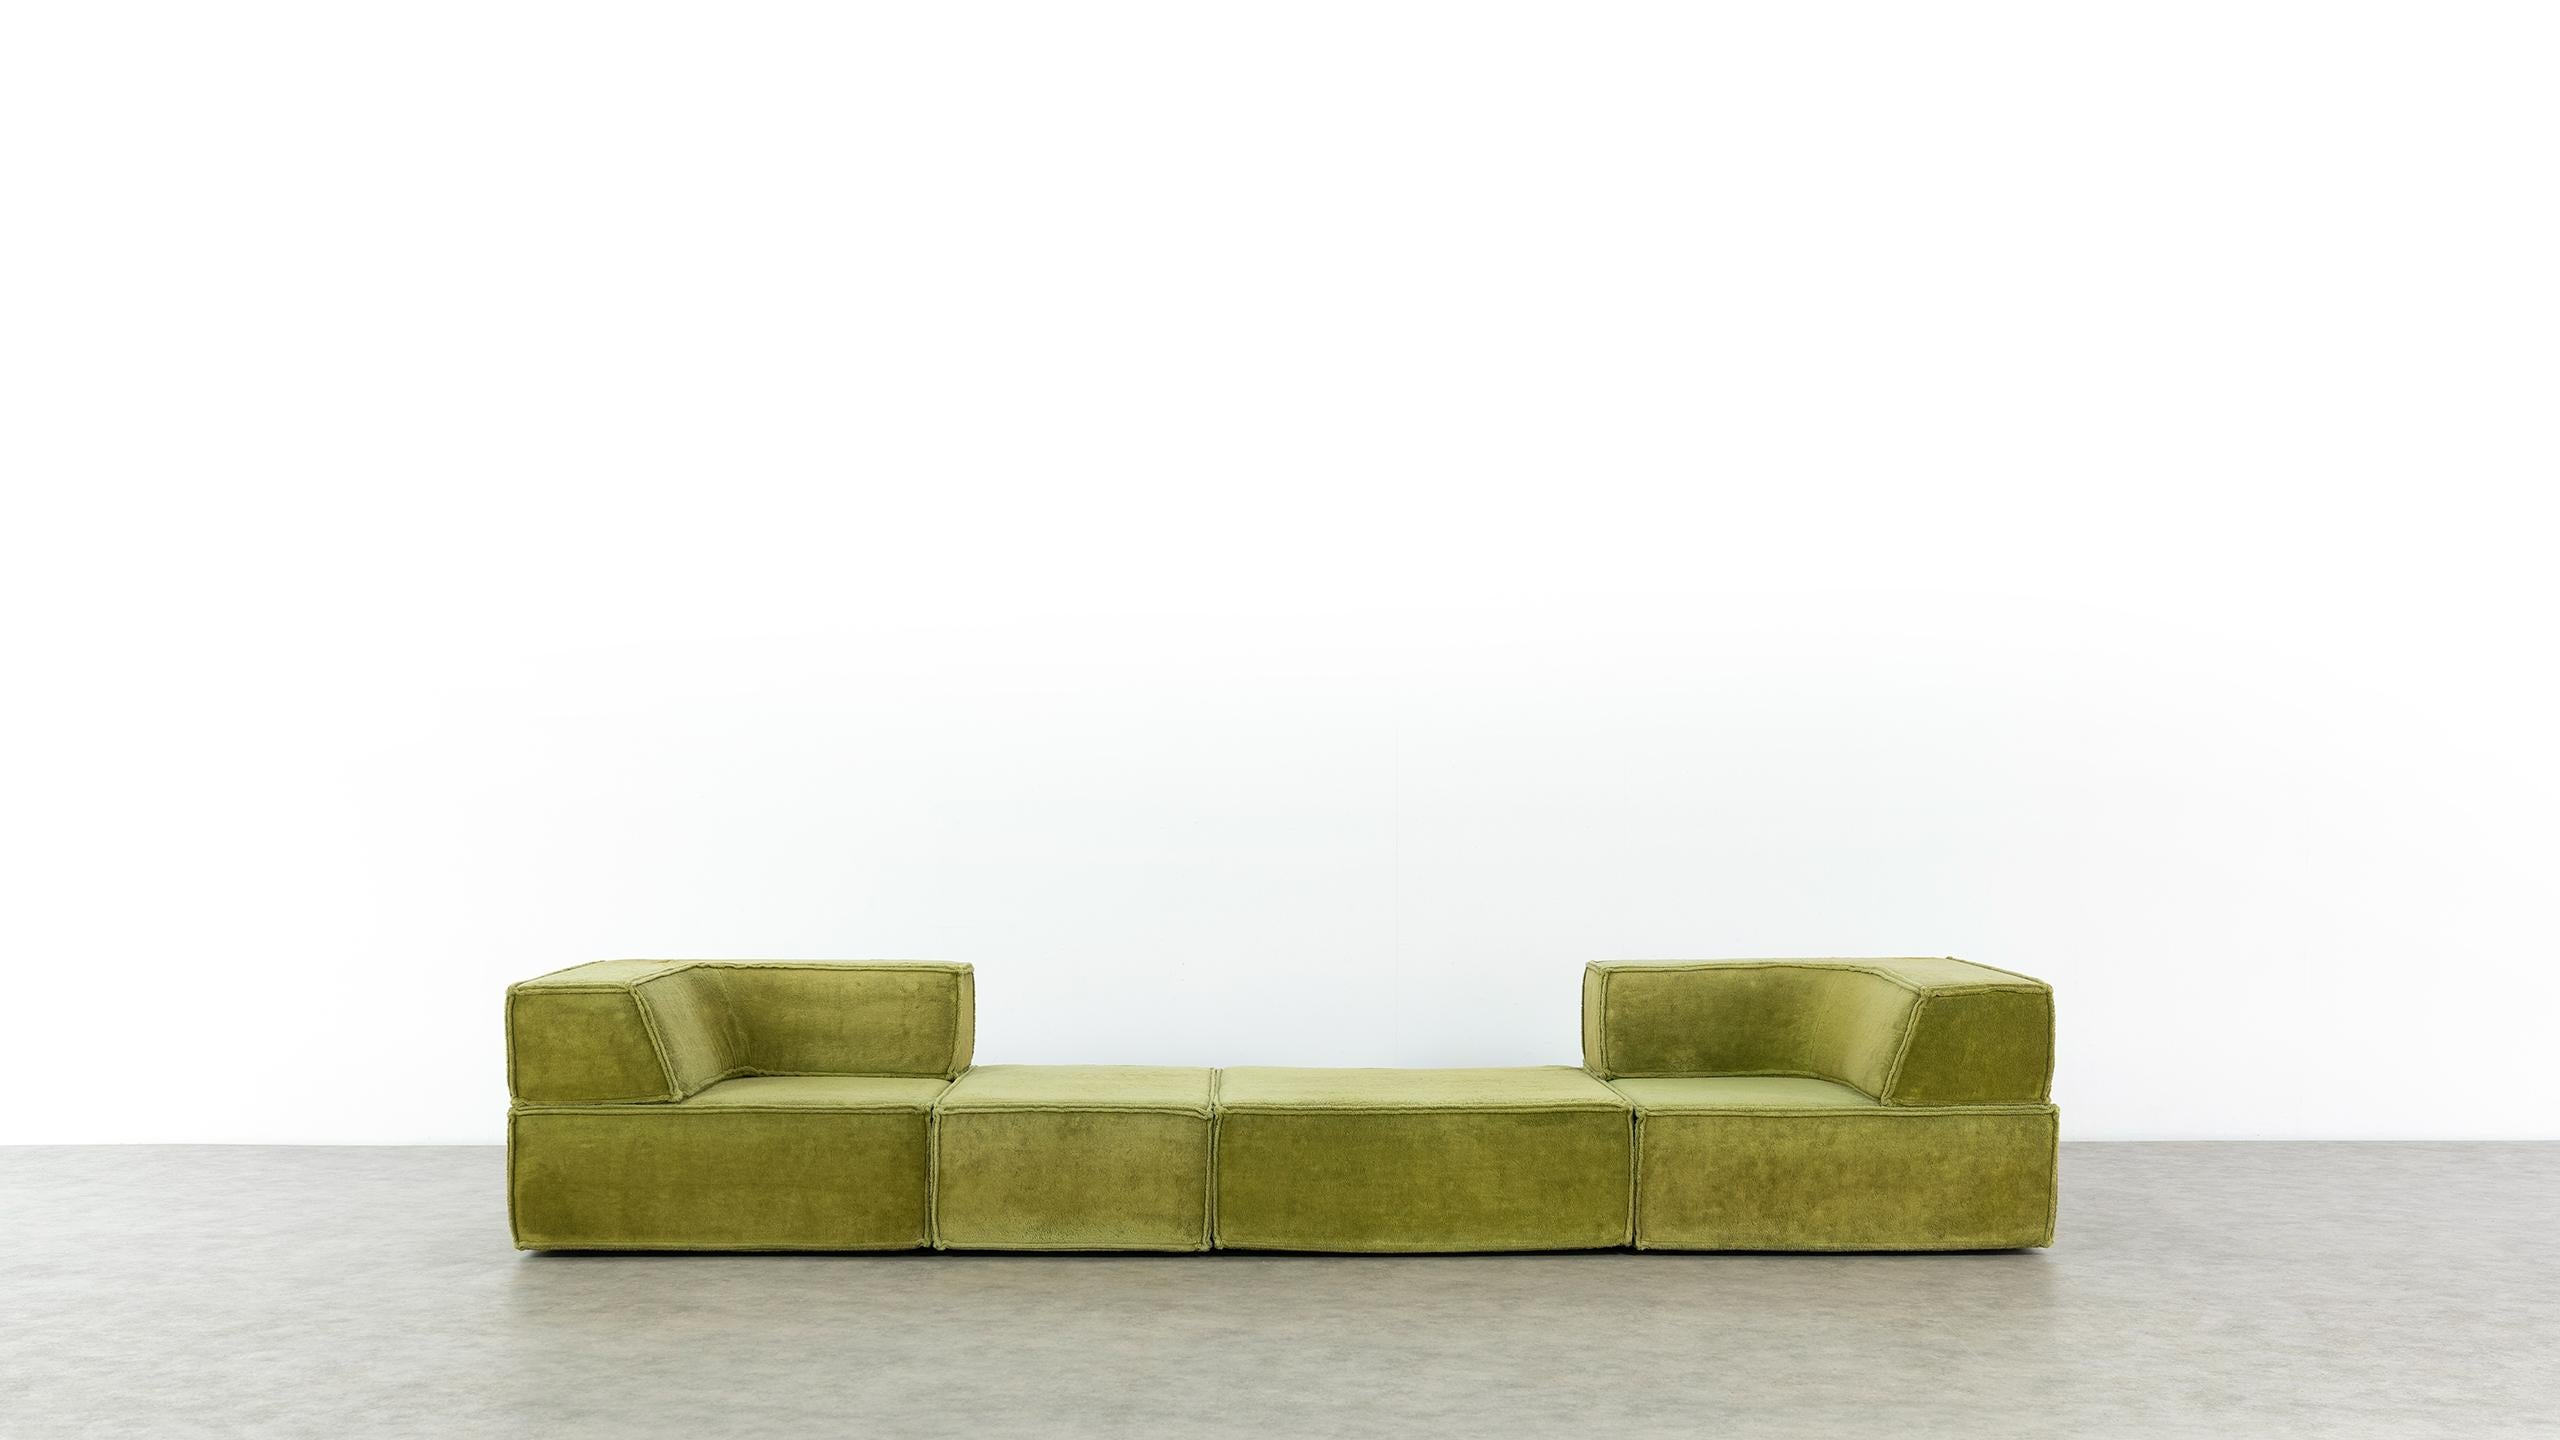 COR Trio Modular Sofa, Giant Landscape in Green, 1972 by Team Form Ag, Swiss 2